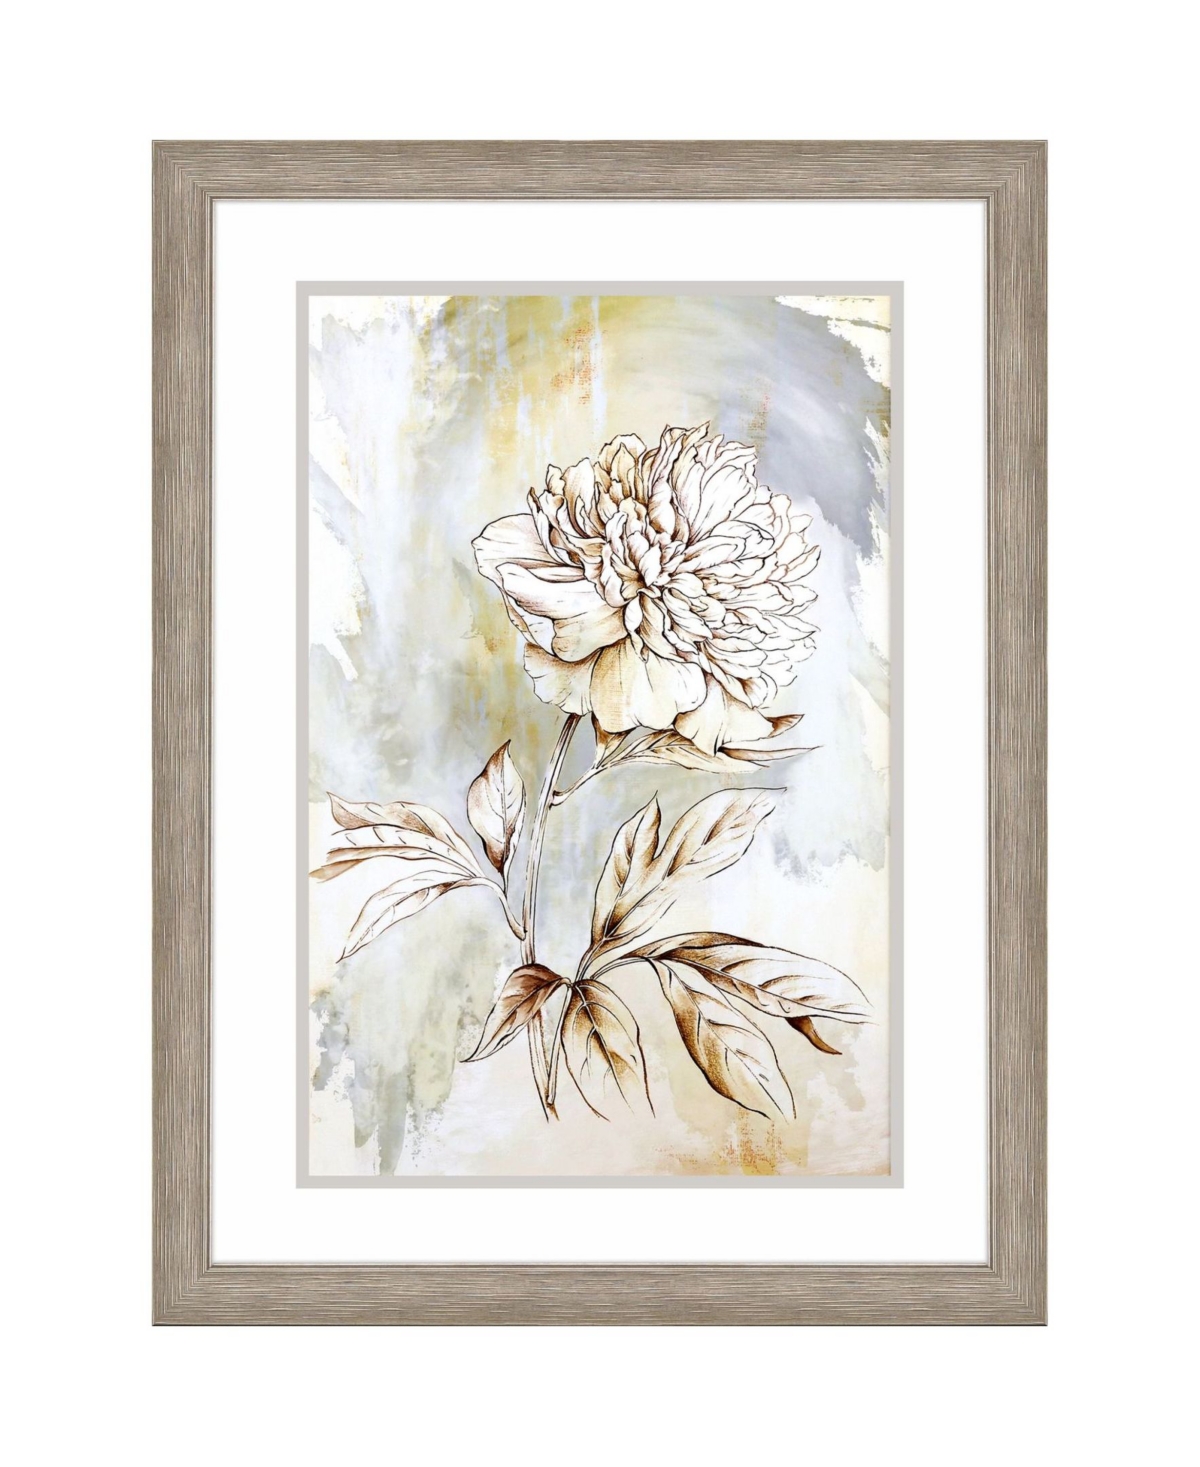 Paragon Picture Gallery Beauty Within I Framed Art In Beige